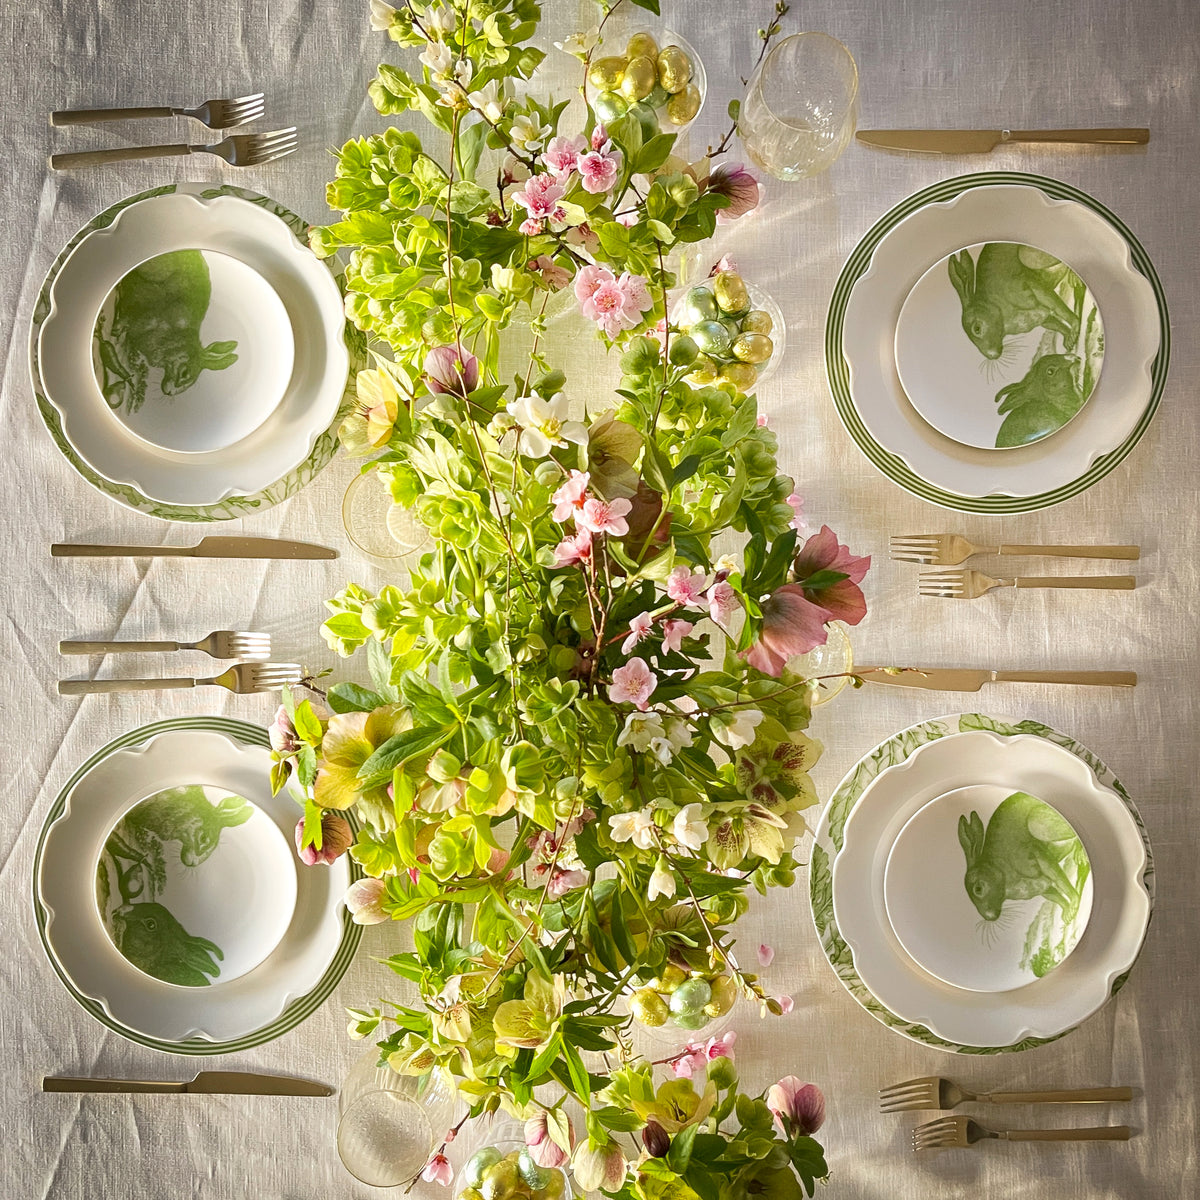 A table setting with four Bunnies Verde Small Plates by Caskata featuring botanical designs, placed around a lush green floral centerpiece. Cutlery and glasses are neatly arranged around each plate on a white tablecloth.